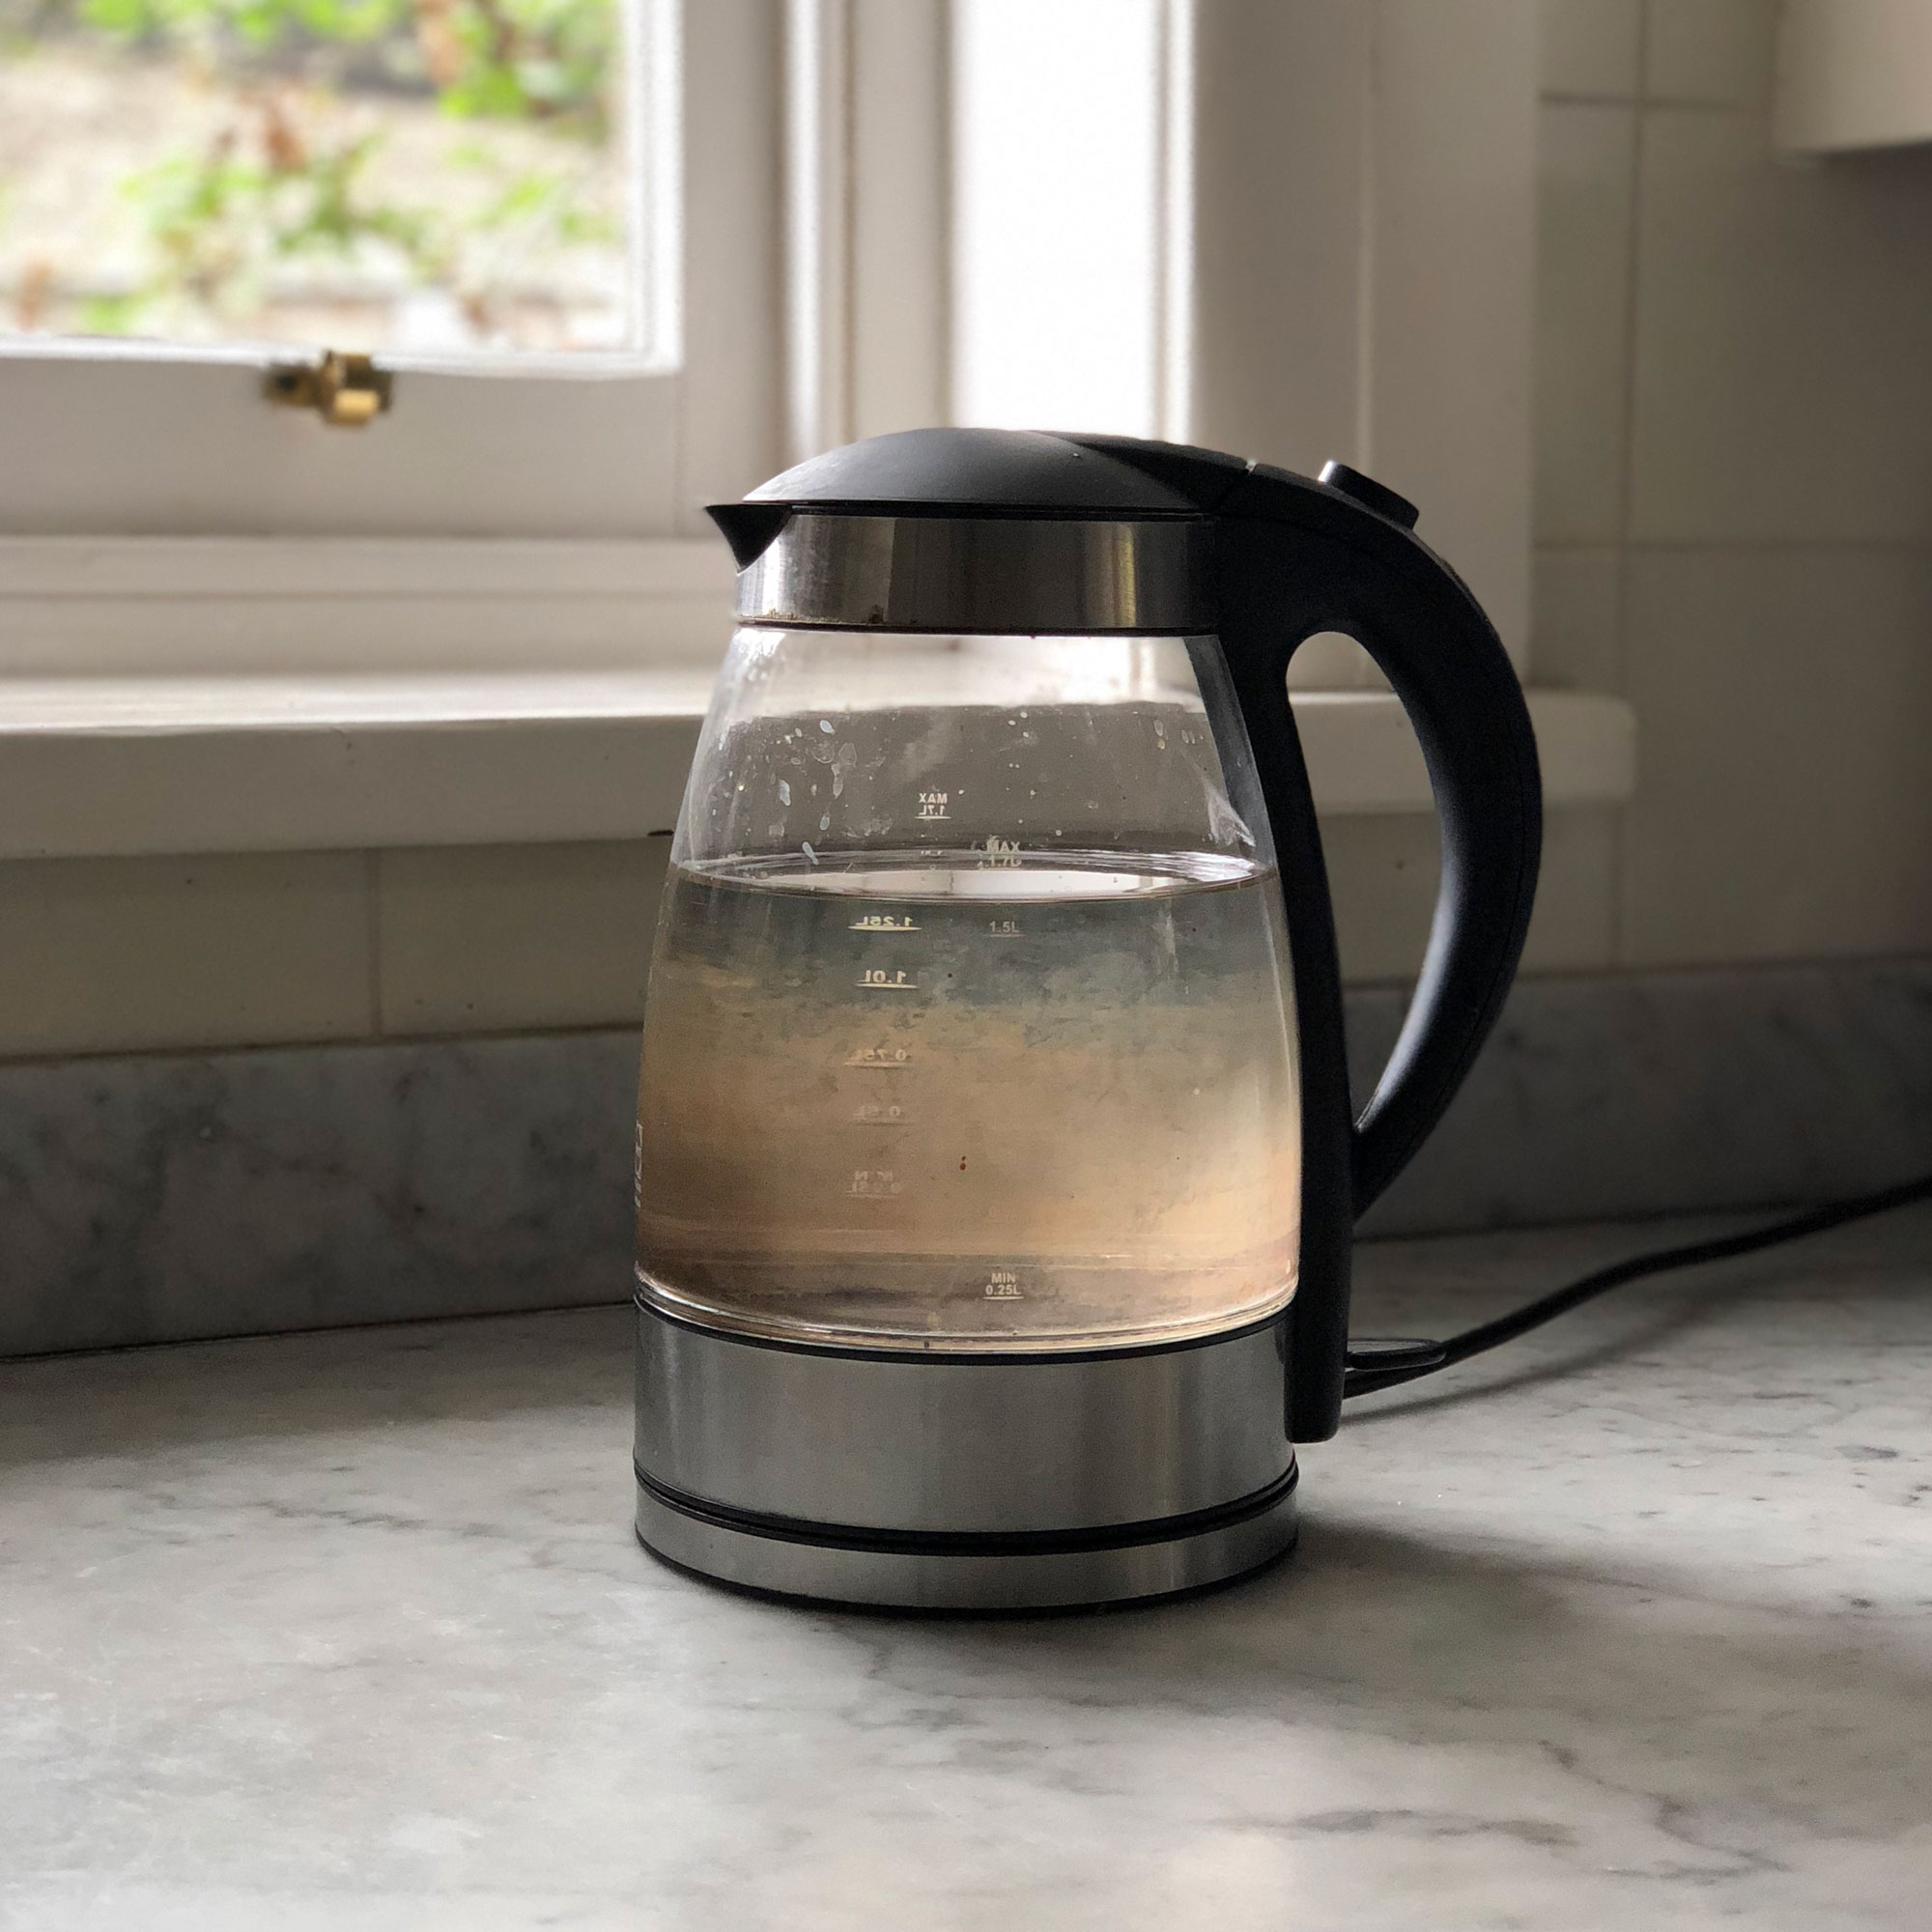 clear kettle with limescale